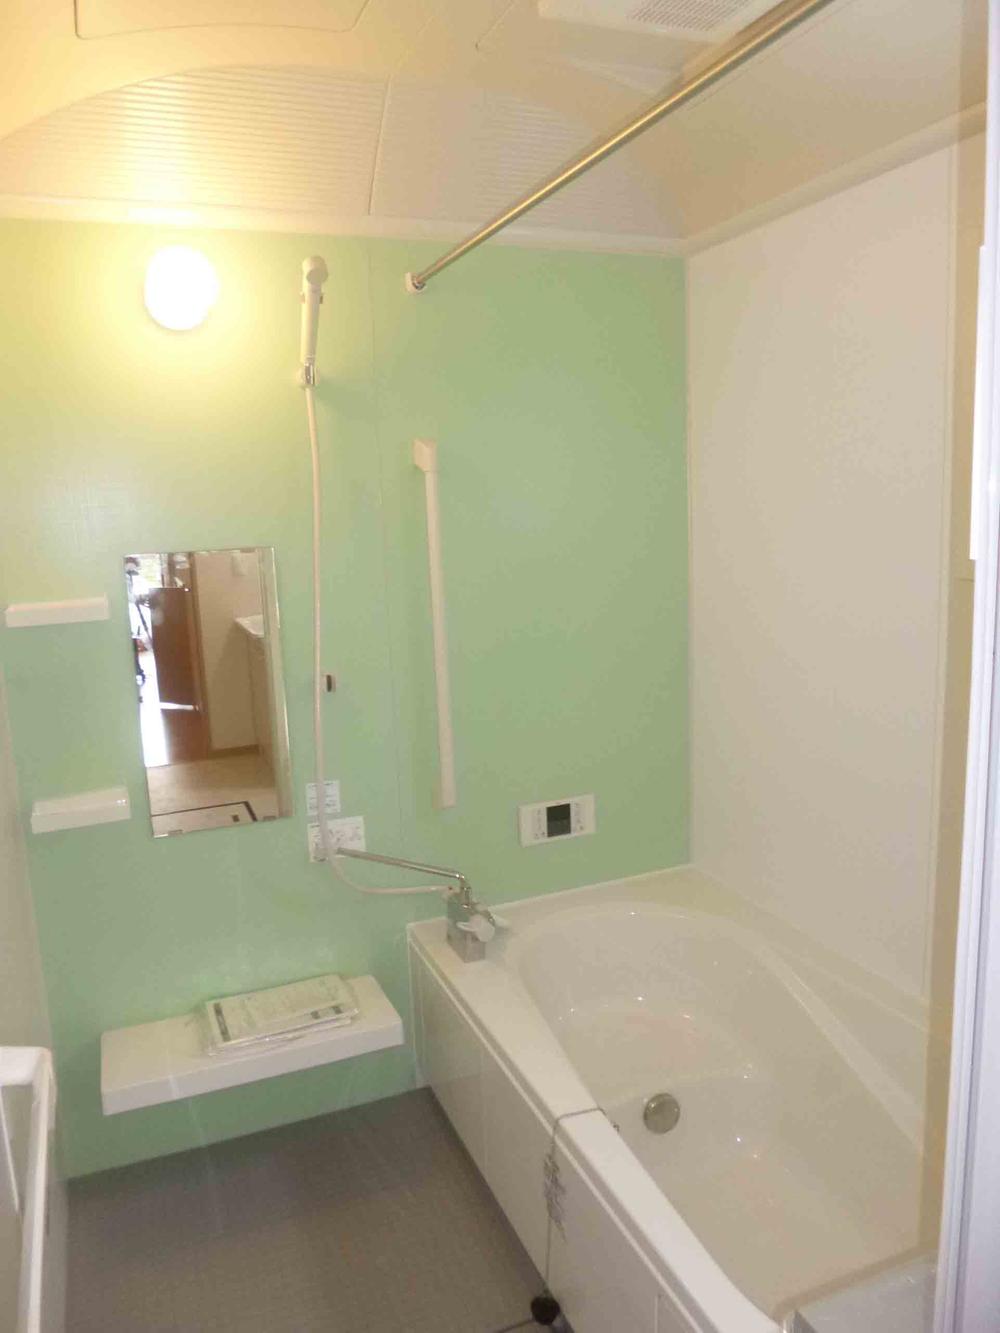 Same specifications photo (bathroom). Example of construction. 